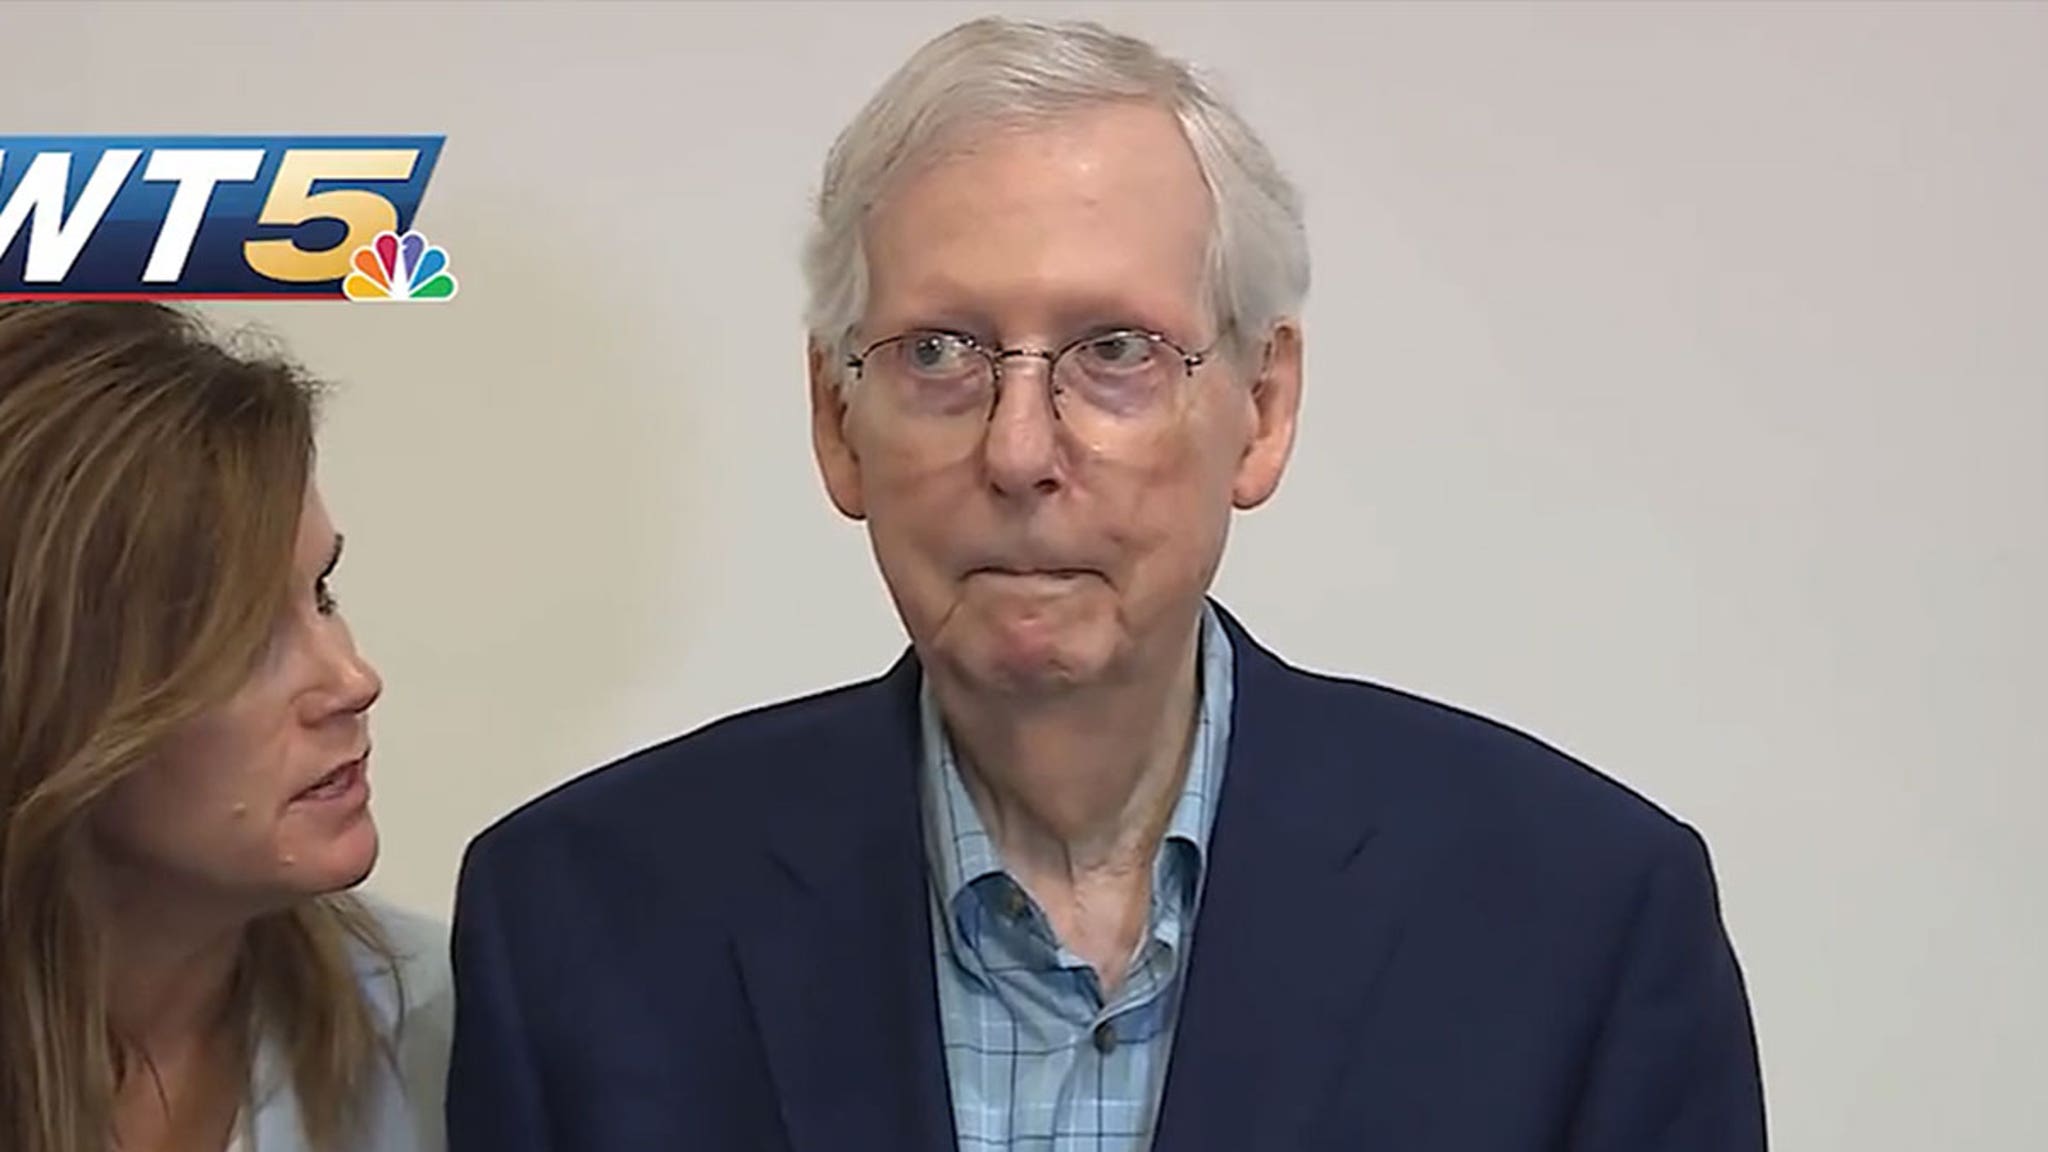 Sen. Mitch McConnell Freezes Again During News Conference